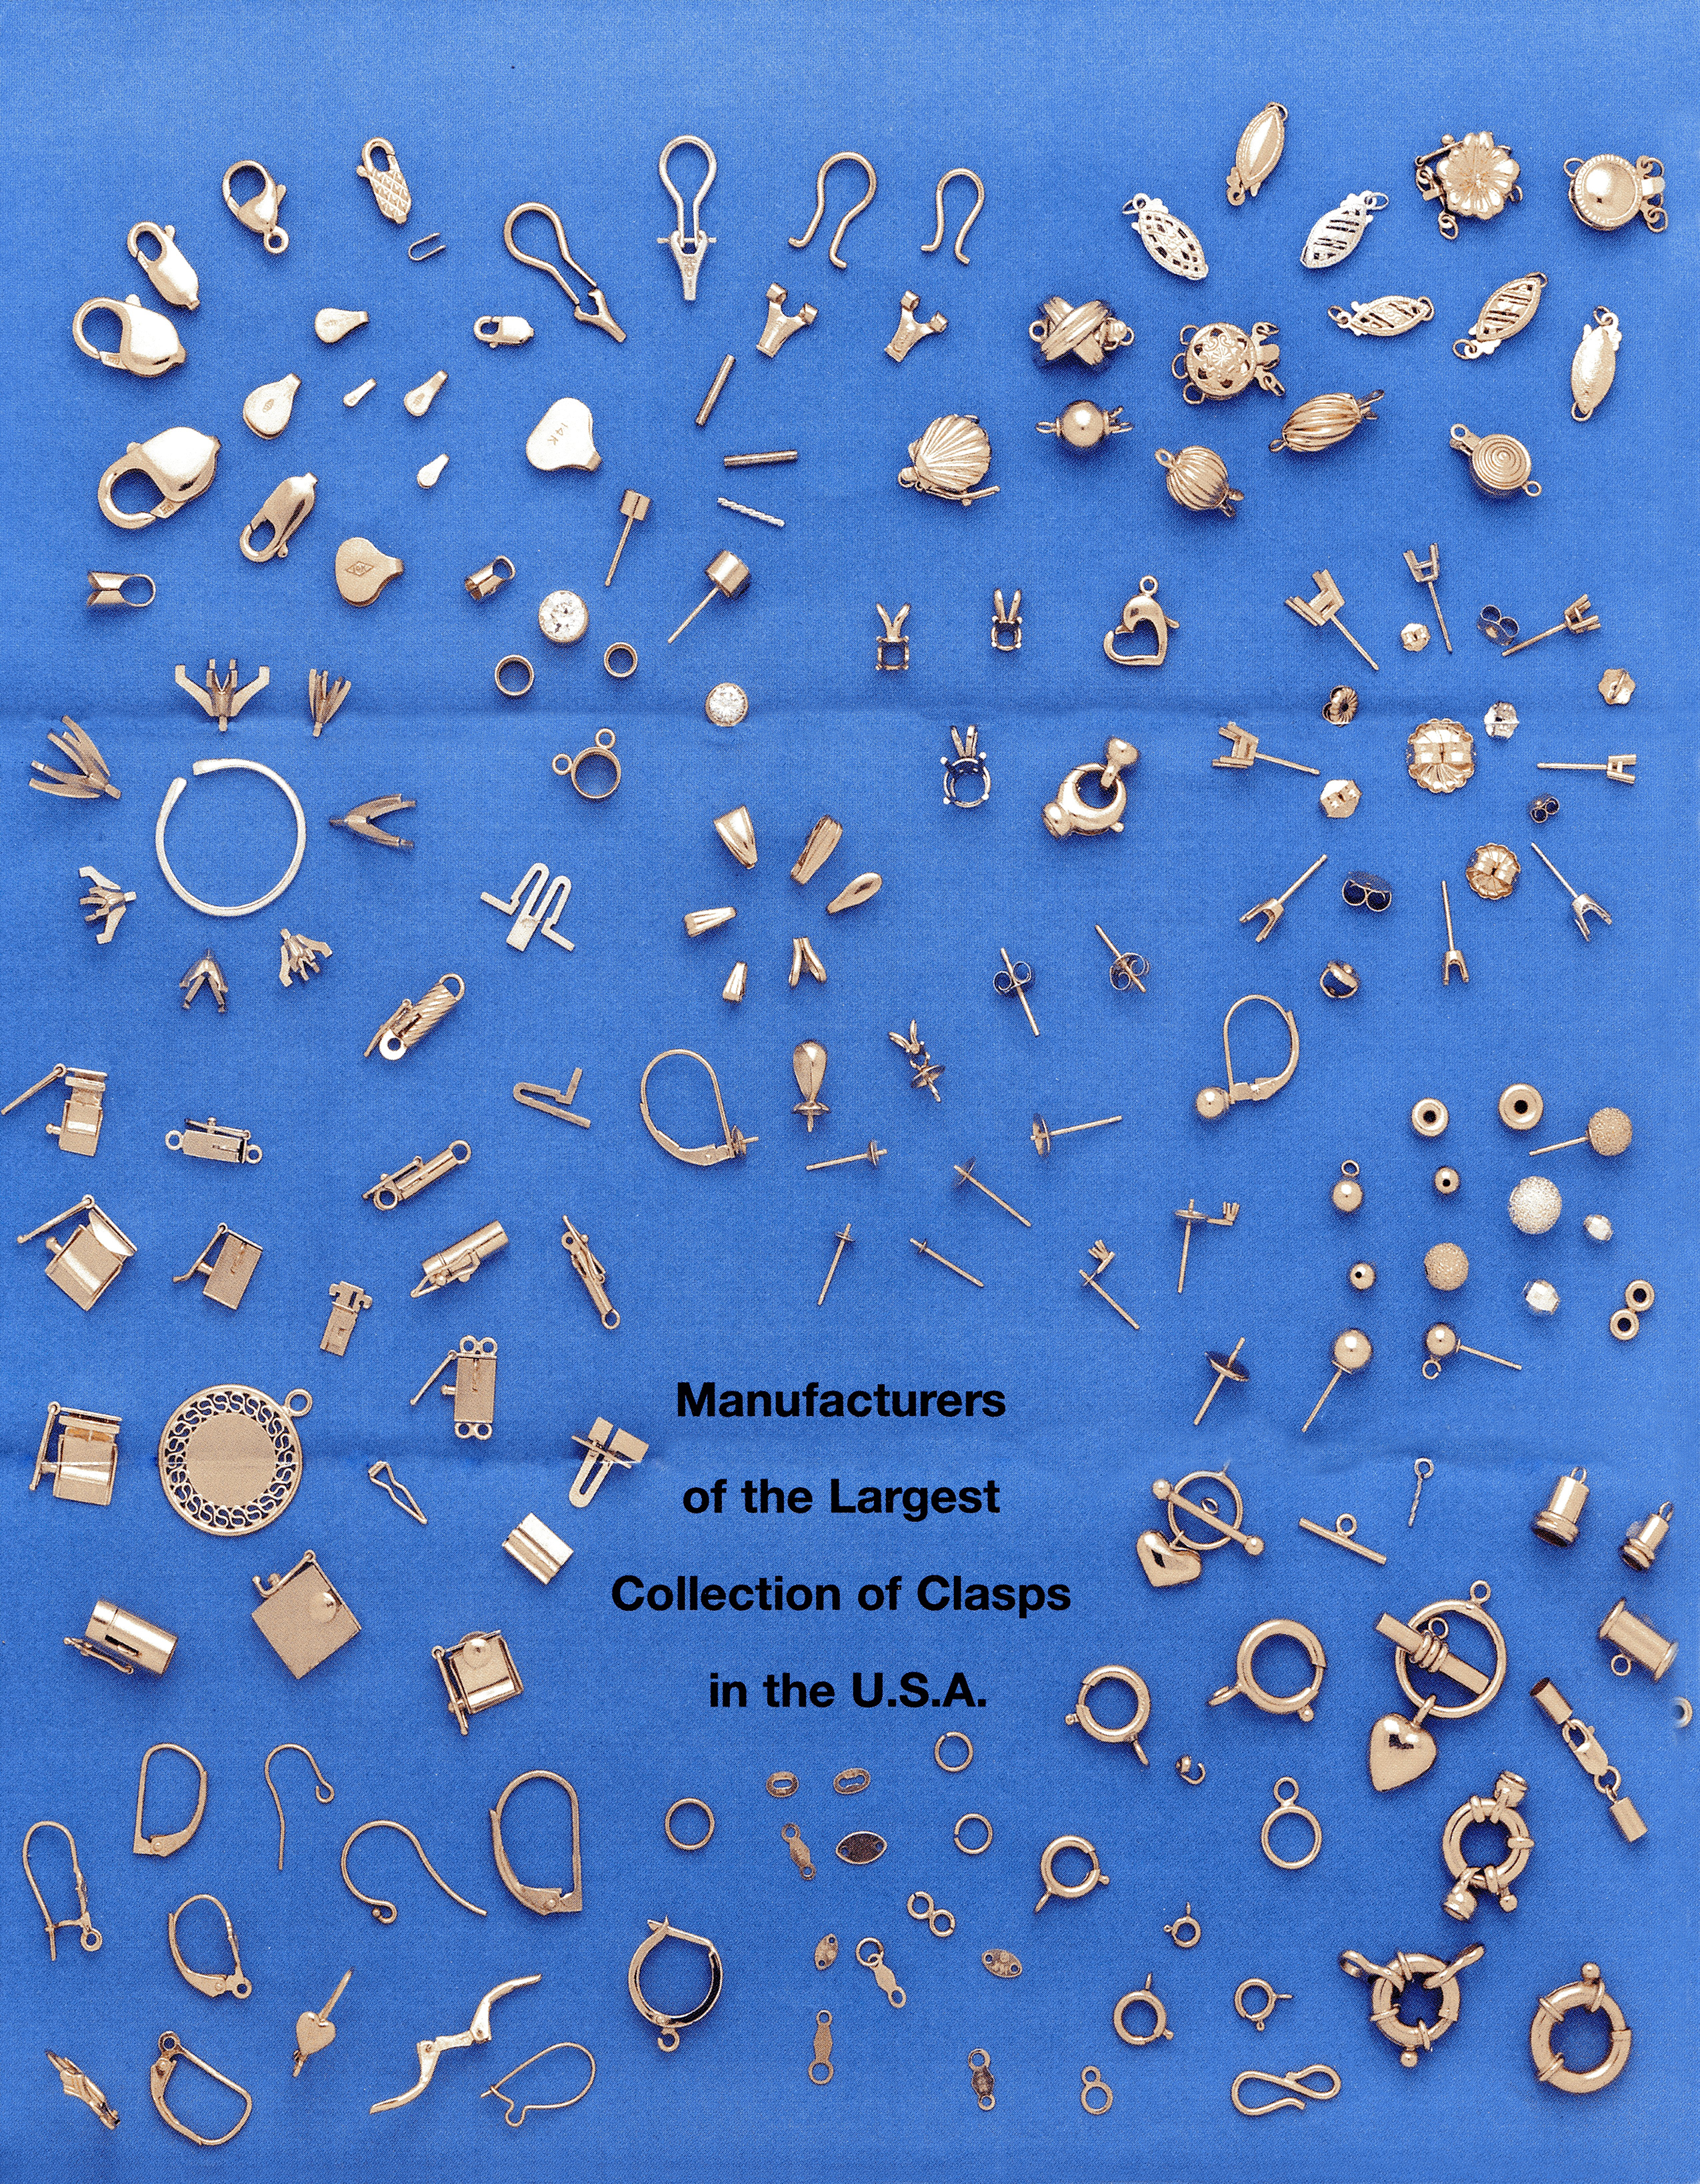 Manufacturers of the Largest Collection of Clasps in the U.S.A